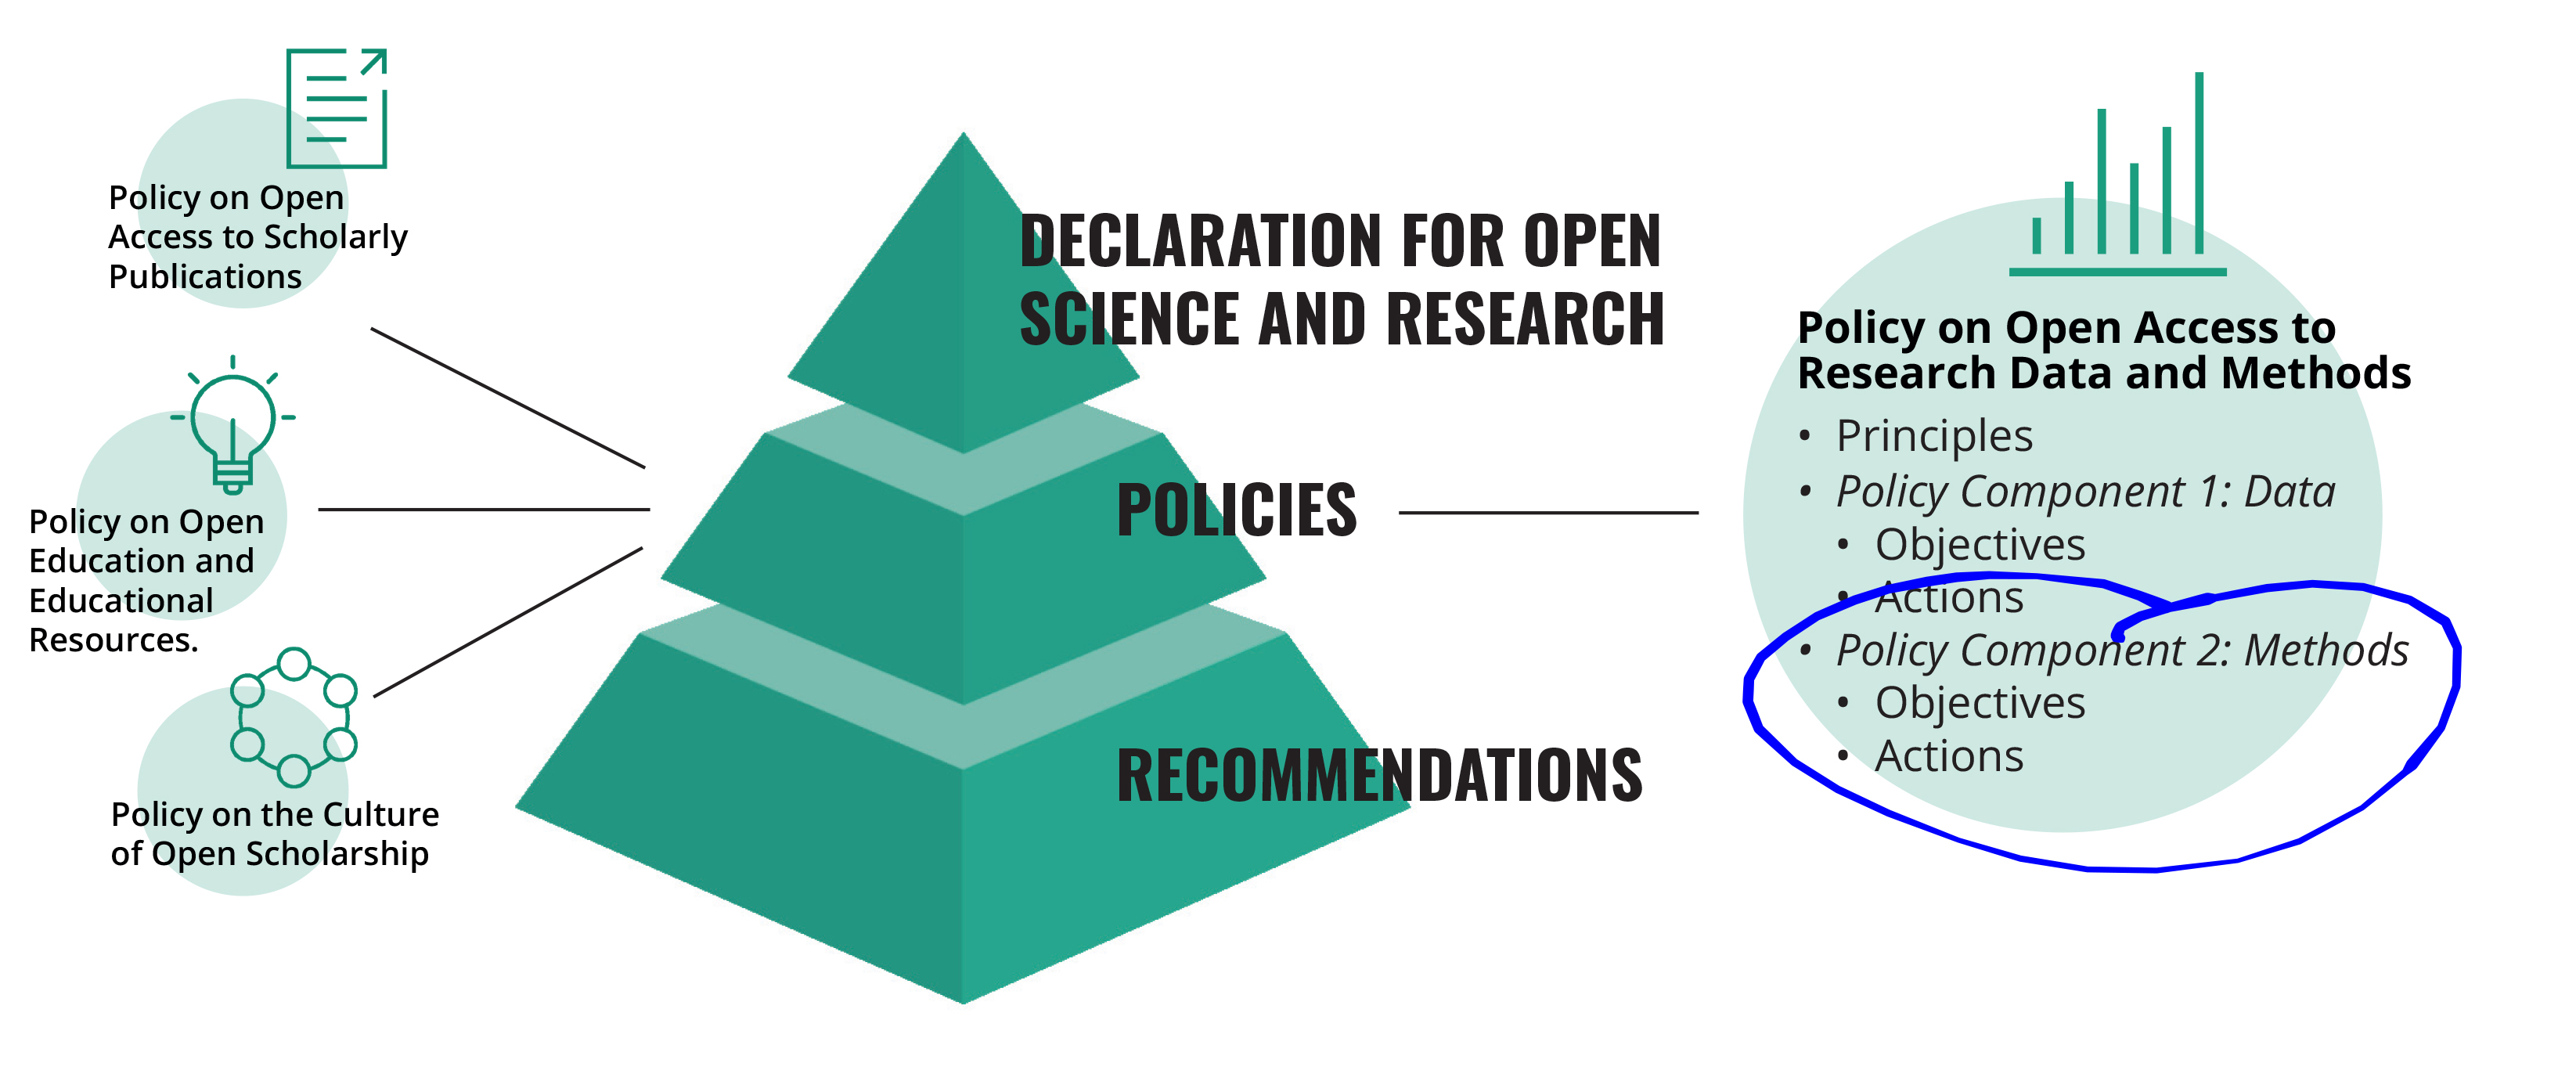 Diagram of the relationship between open science documents. The Declaration of Open Science and Research forms the top of a three-tiered pyramid, policies form the middle, and recommendations form the basis of the pyramid. The policies consist of strategic principles as well as policy components with related objectives and actions. Four areas of open science will be addressed: open culture of research (no polic components), open access (policy components on journal articles, mongraphs and theses), research data (policy components open research data and open research methods and infrastructures) and open education (policy components on open educational materials and open educational resources).